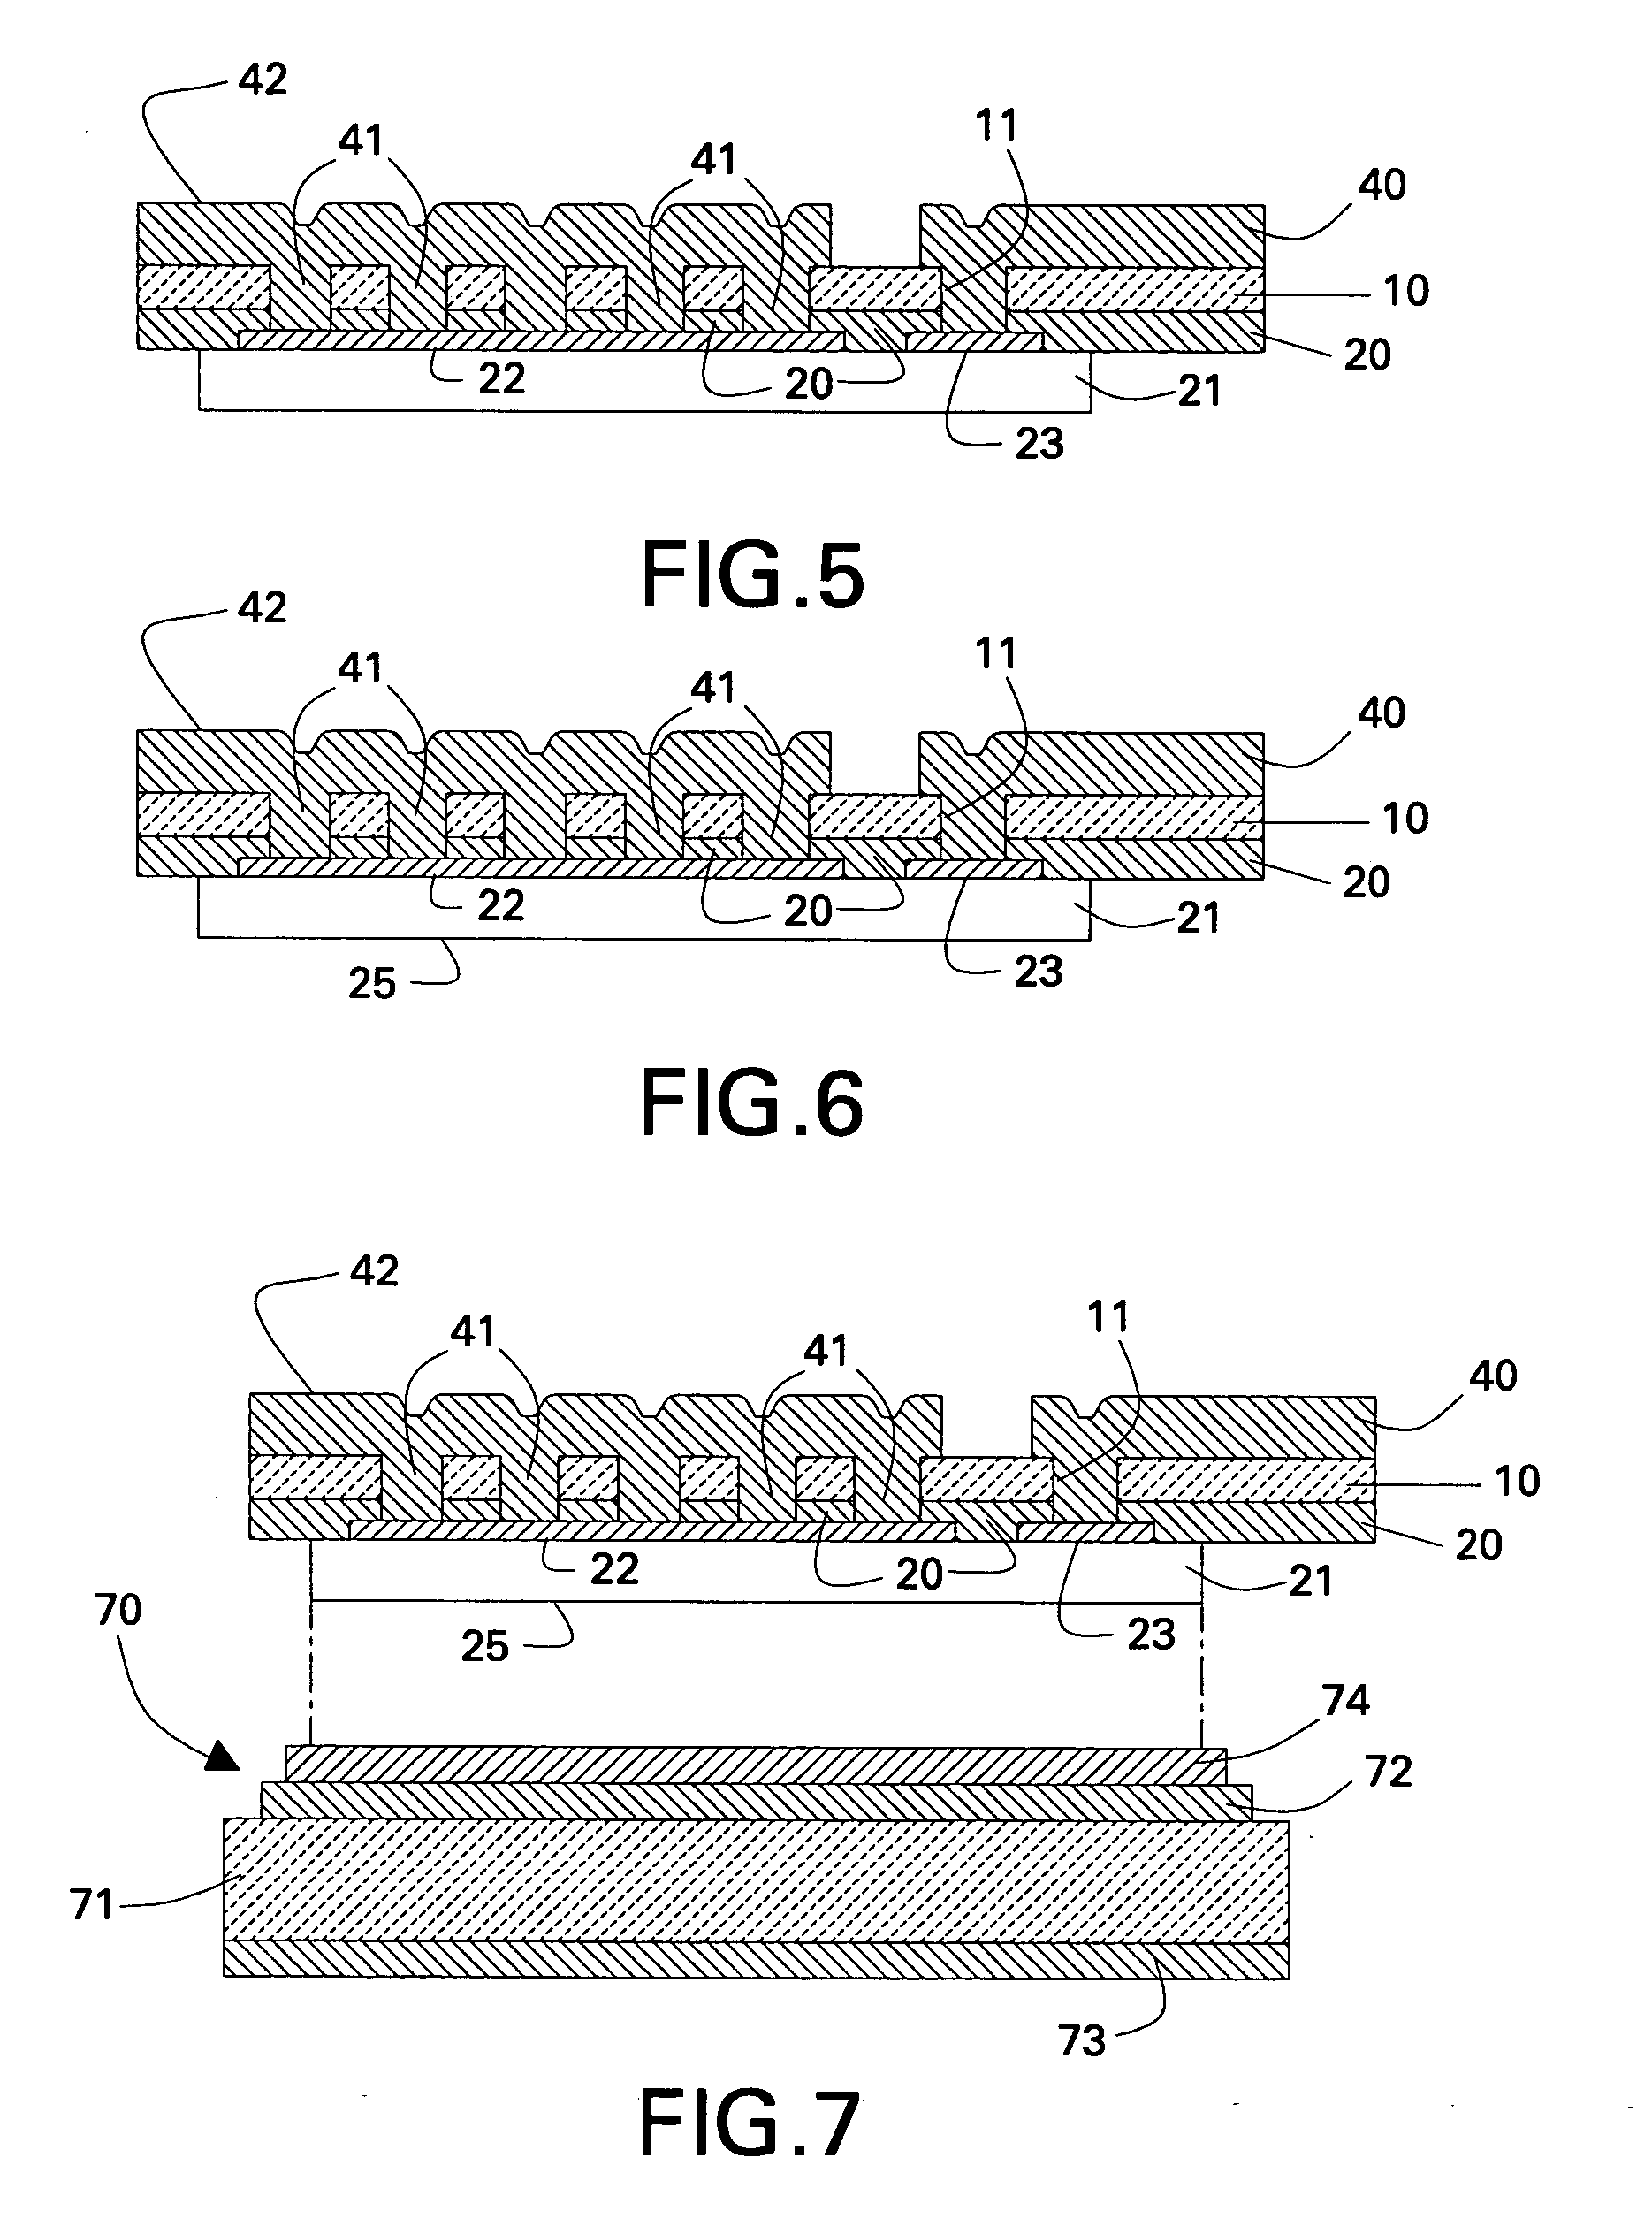 Power semiconductor packaging method and structure